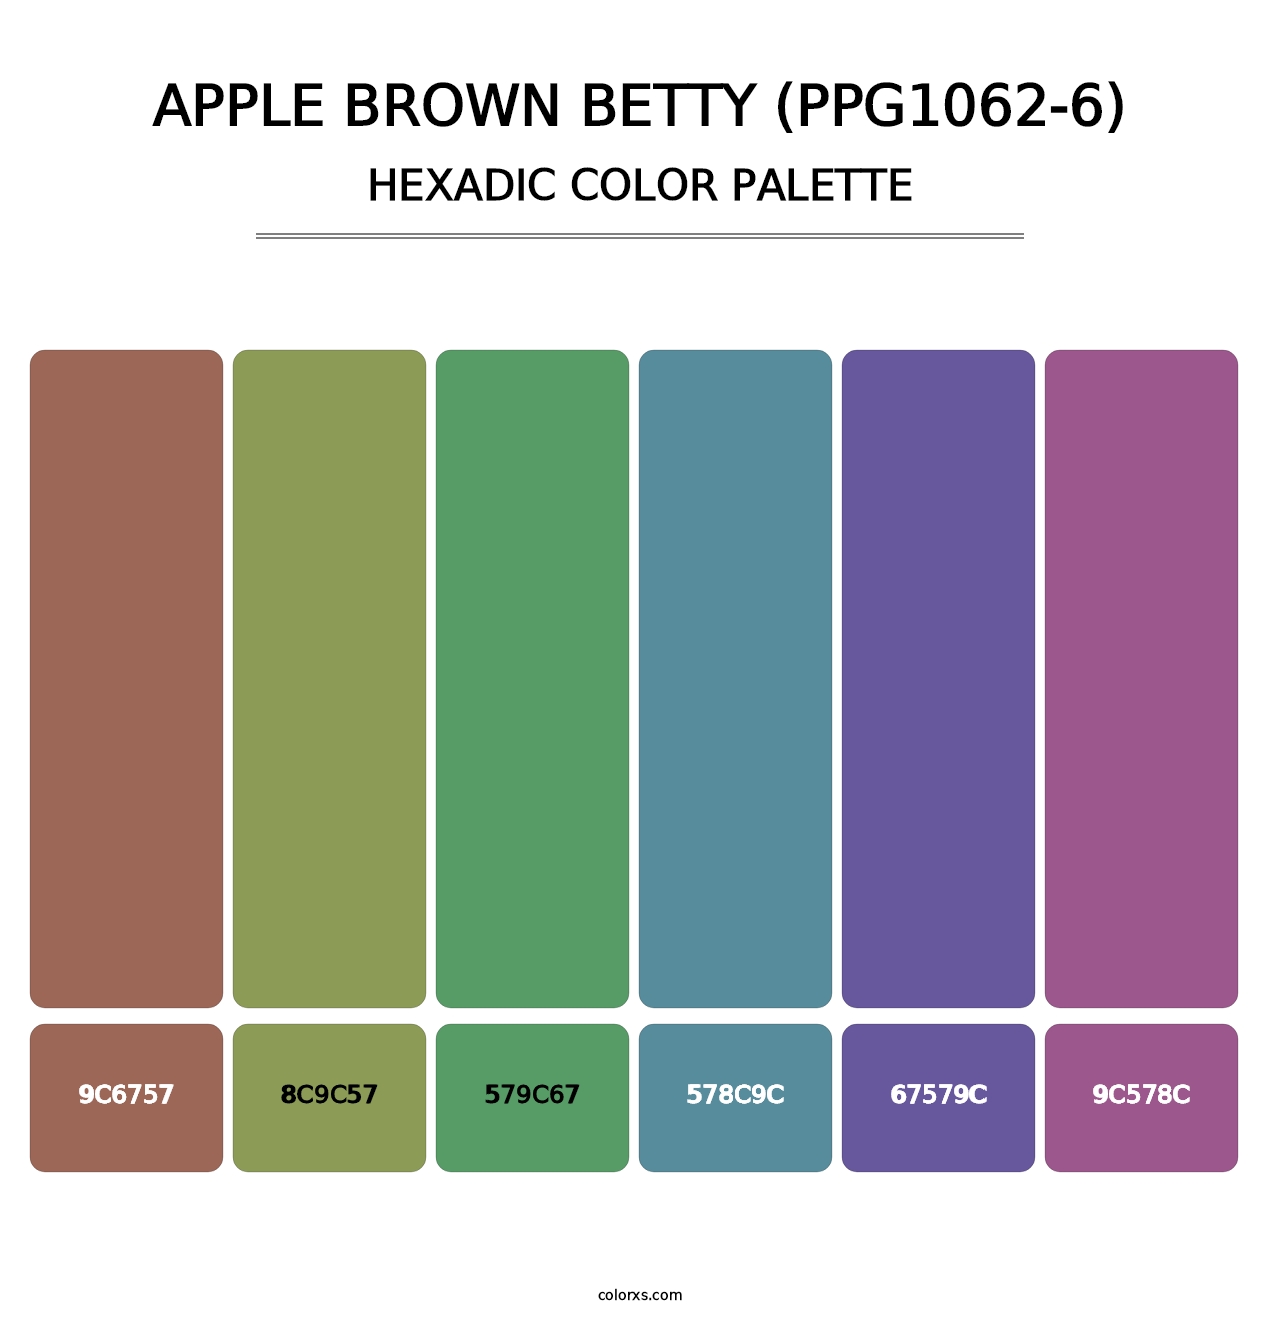 Apple Brown Betty (PPG1062-6) - Hexadic Color Palette